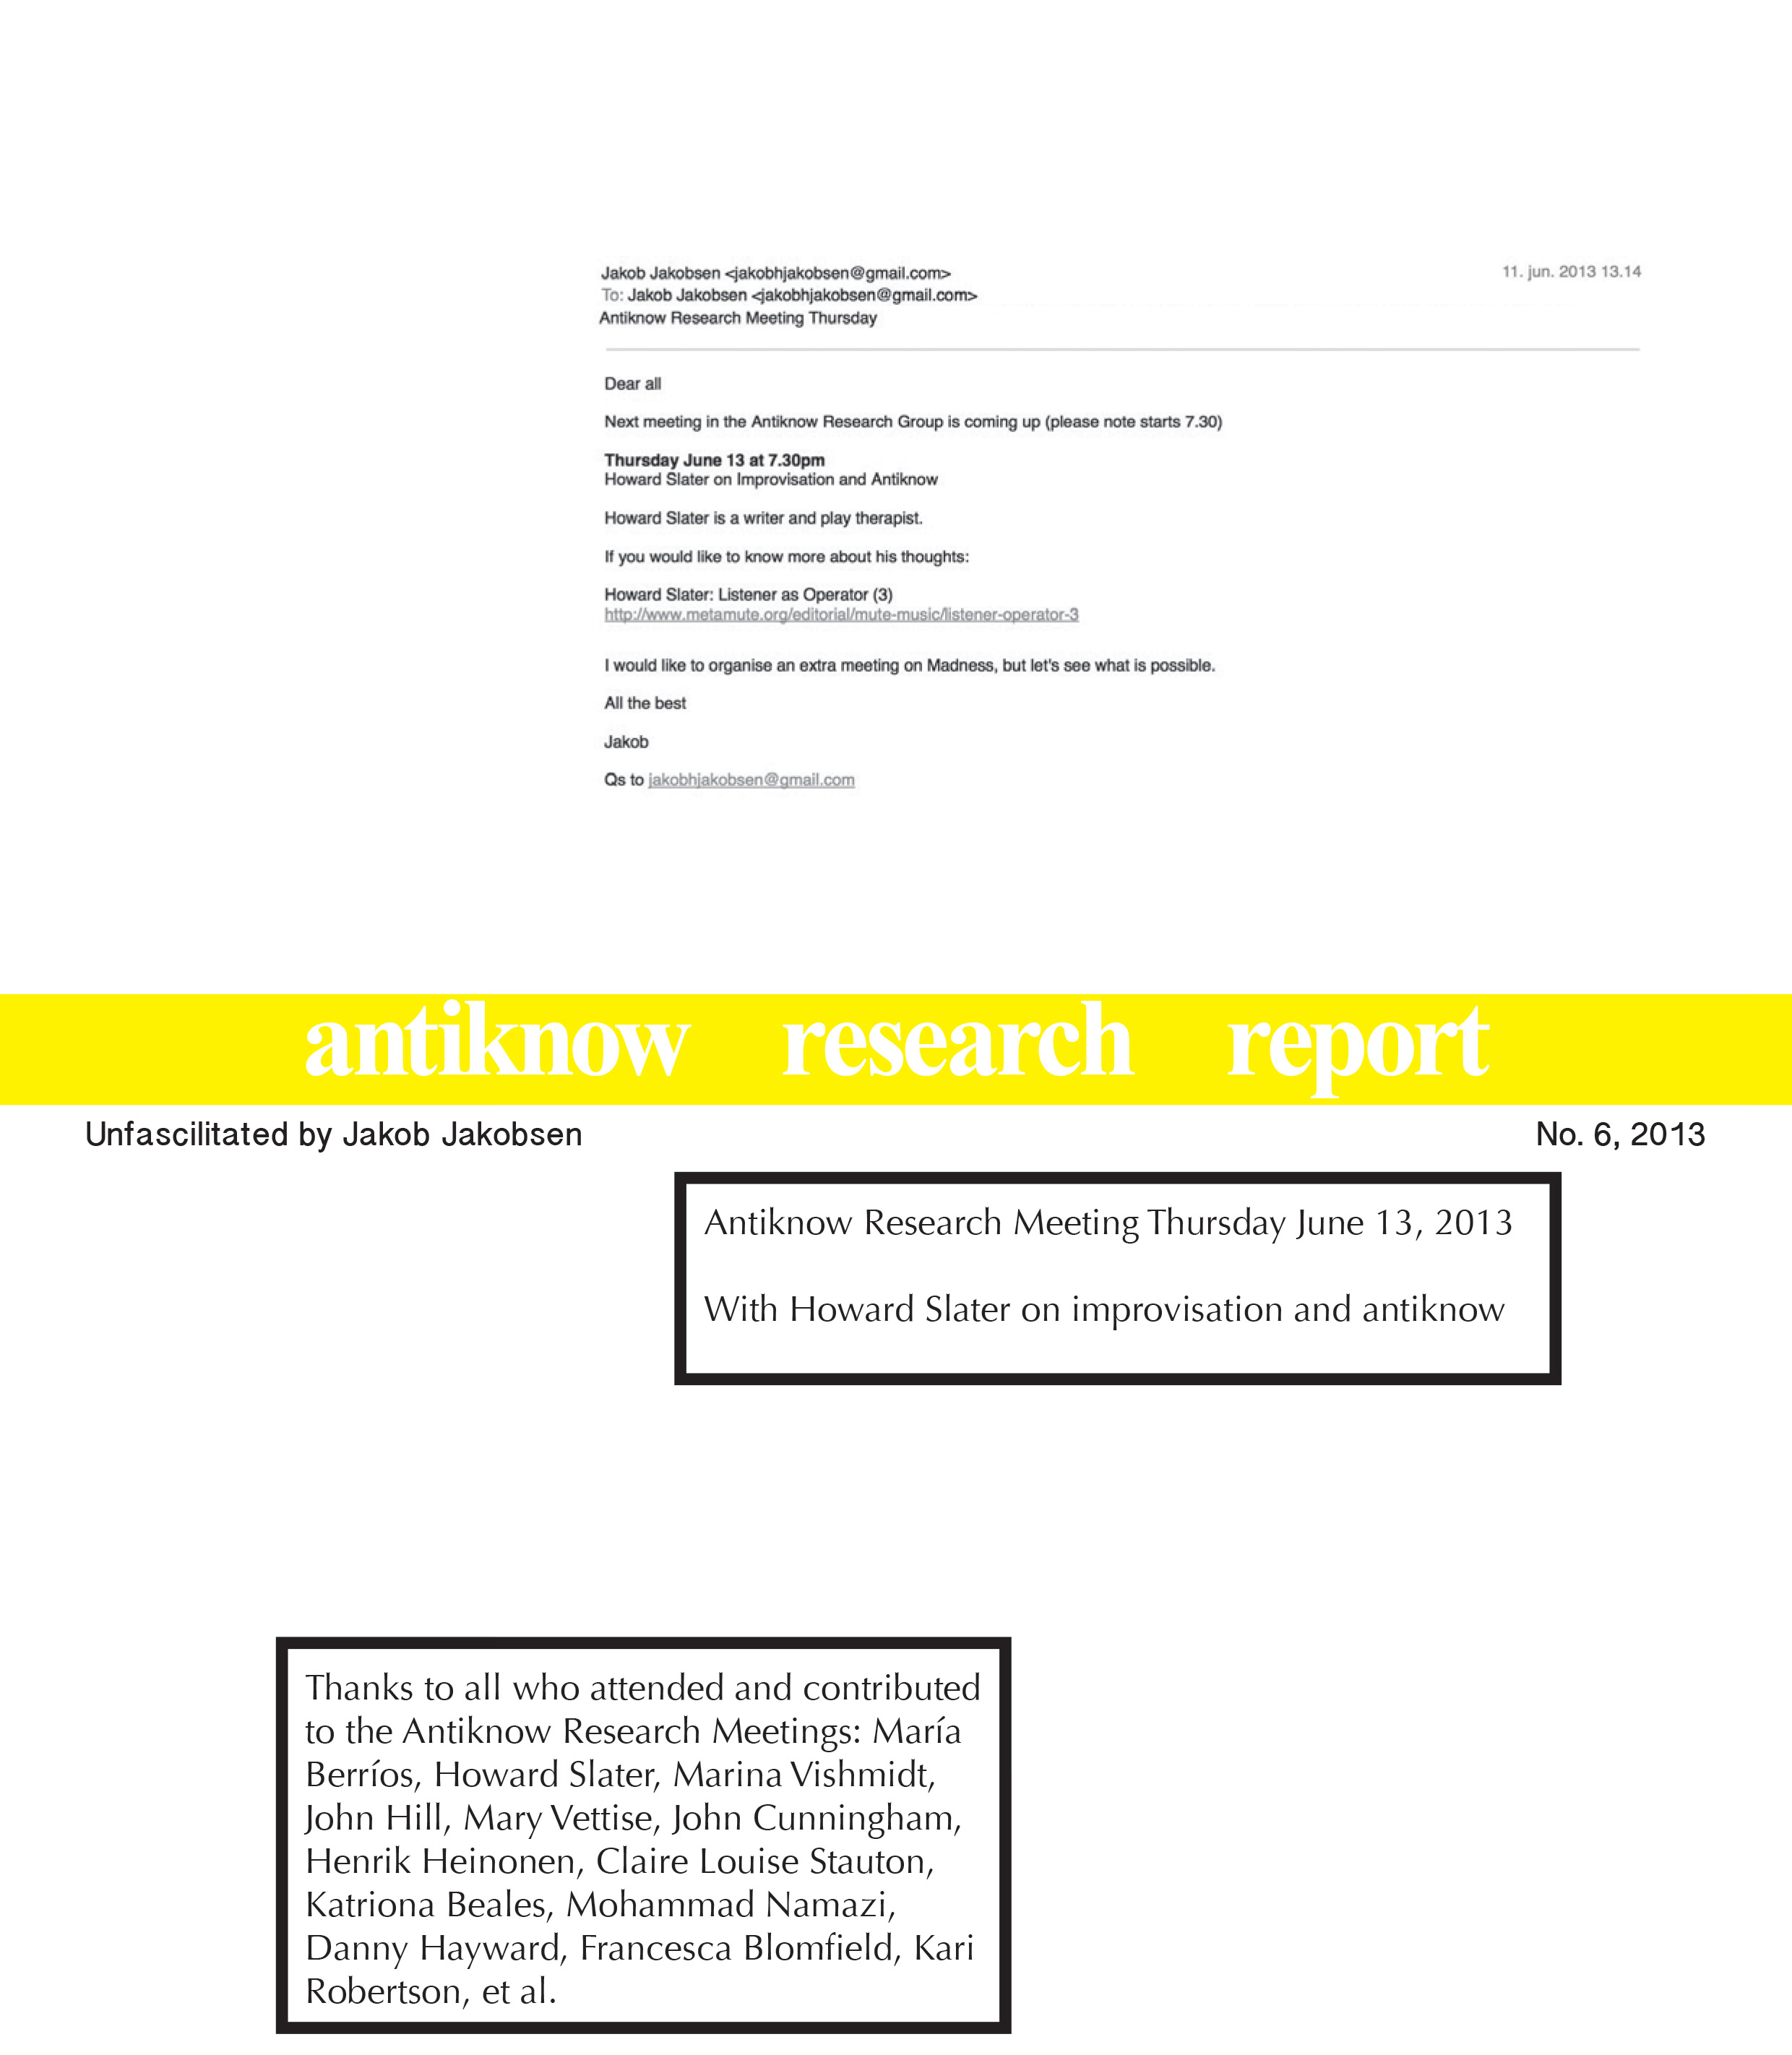 ANTIKNOW RESEARCH REPORT